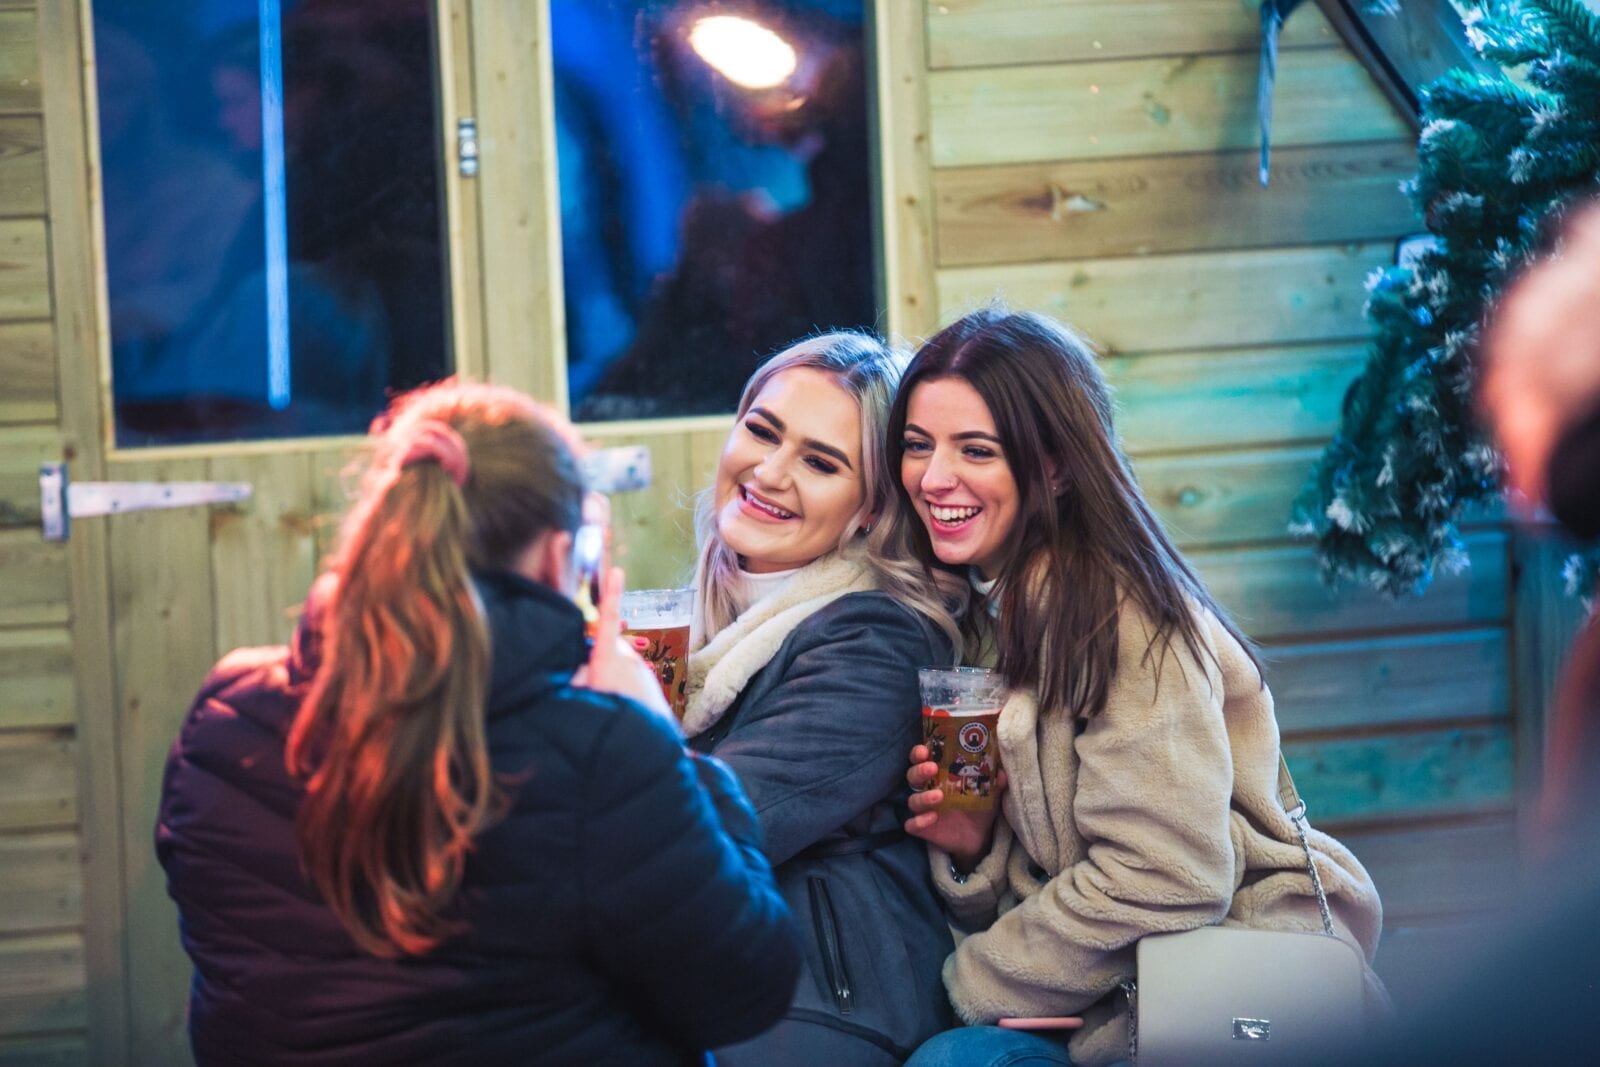 Bar Hütte takes over Great Northern square with music, mince pies and private alpine cabins, The Manc